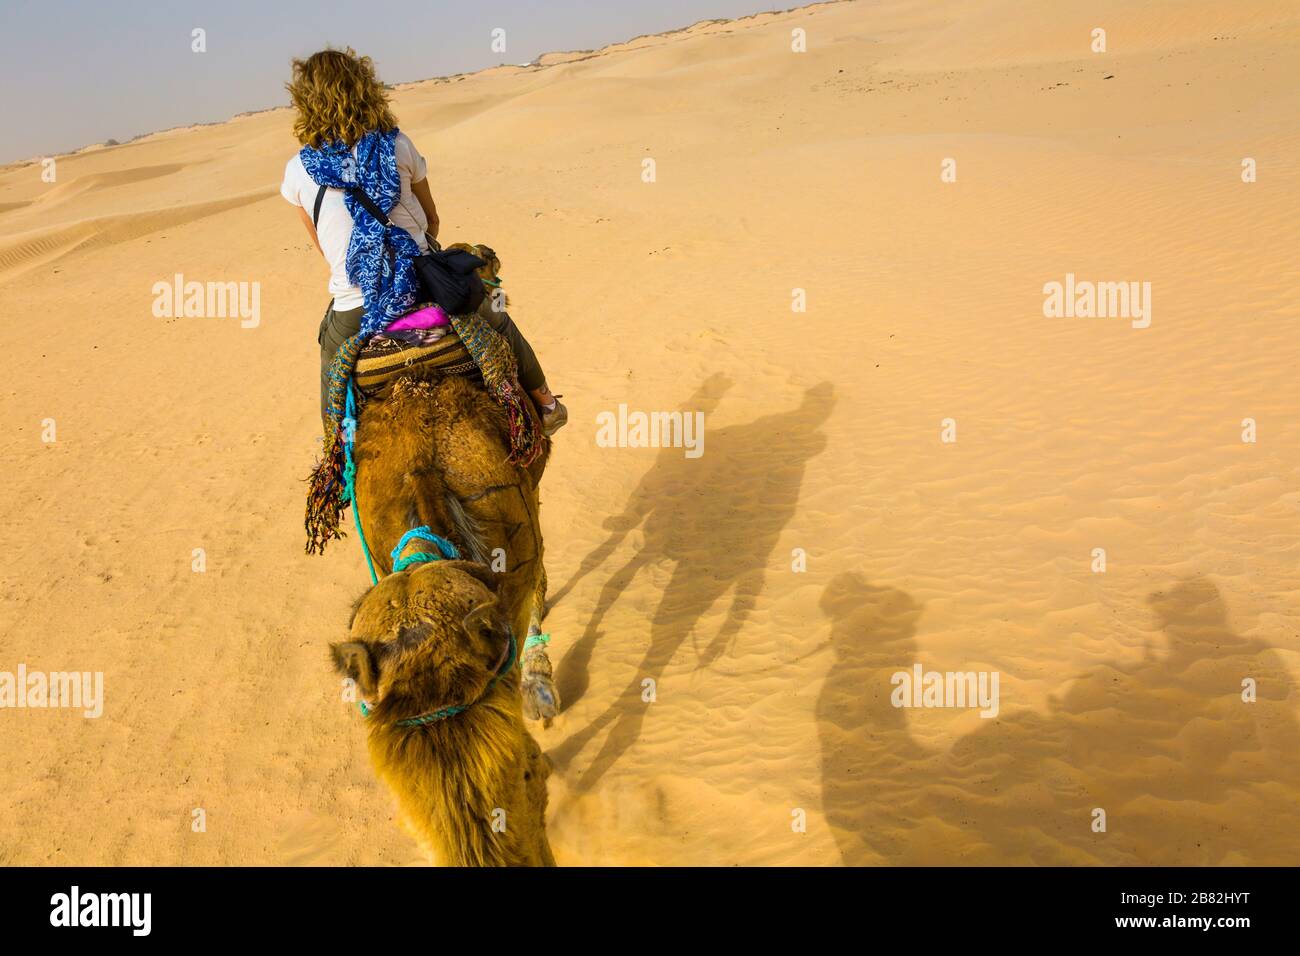 Woman in a dromedary ride in the desert. Stock Photo